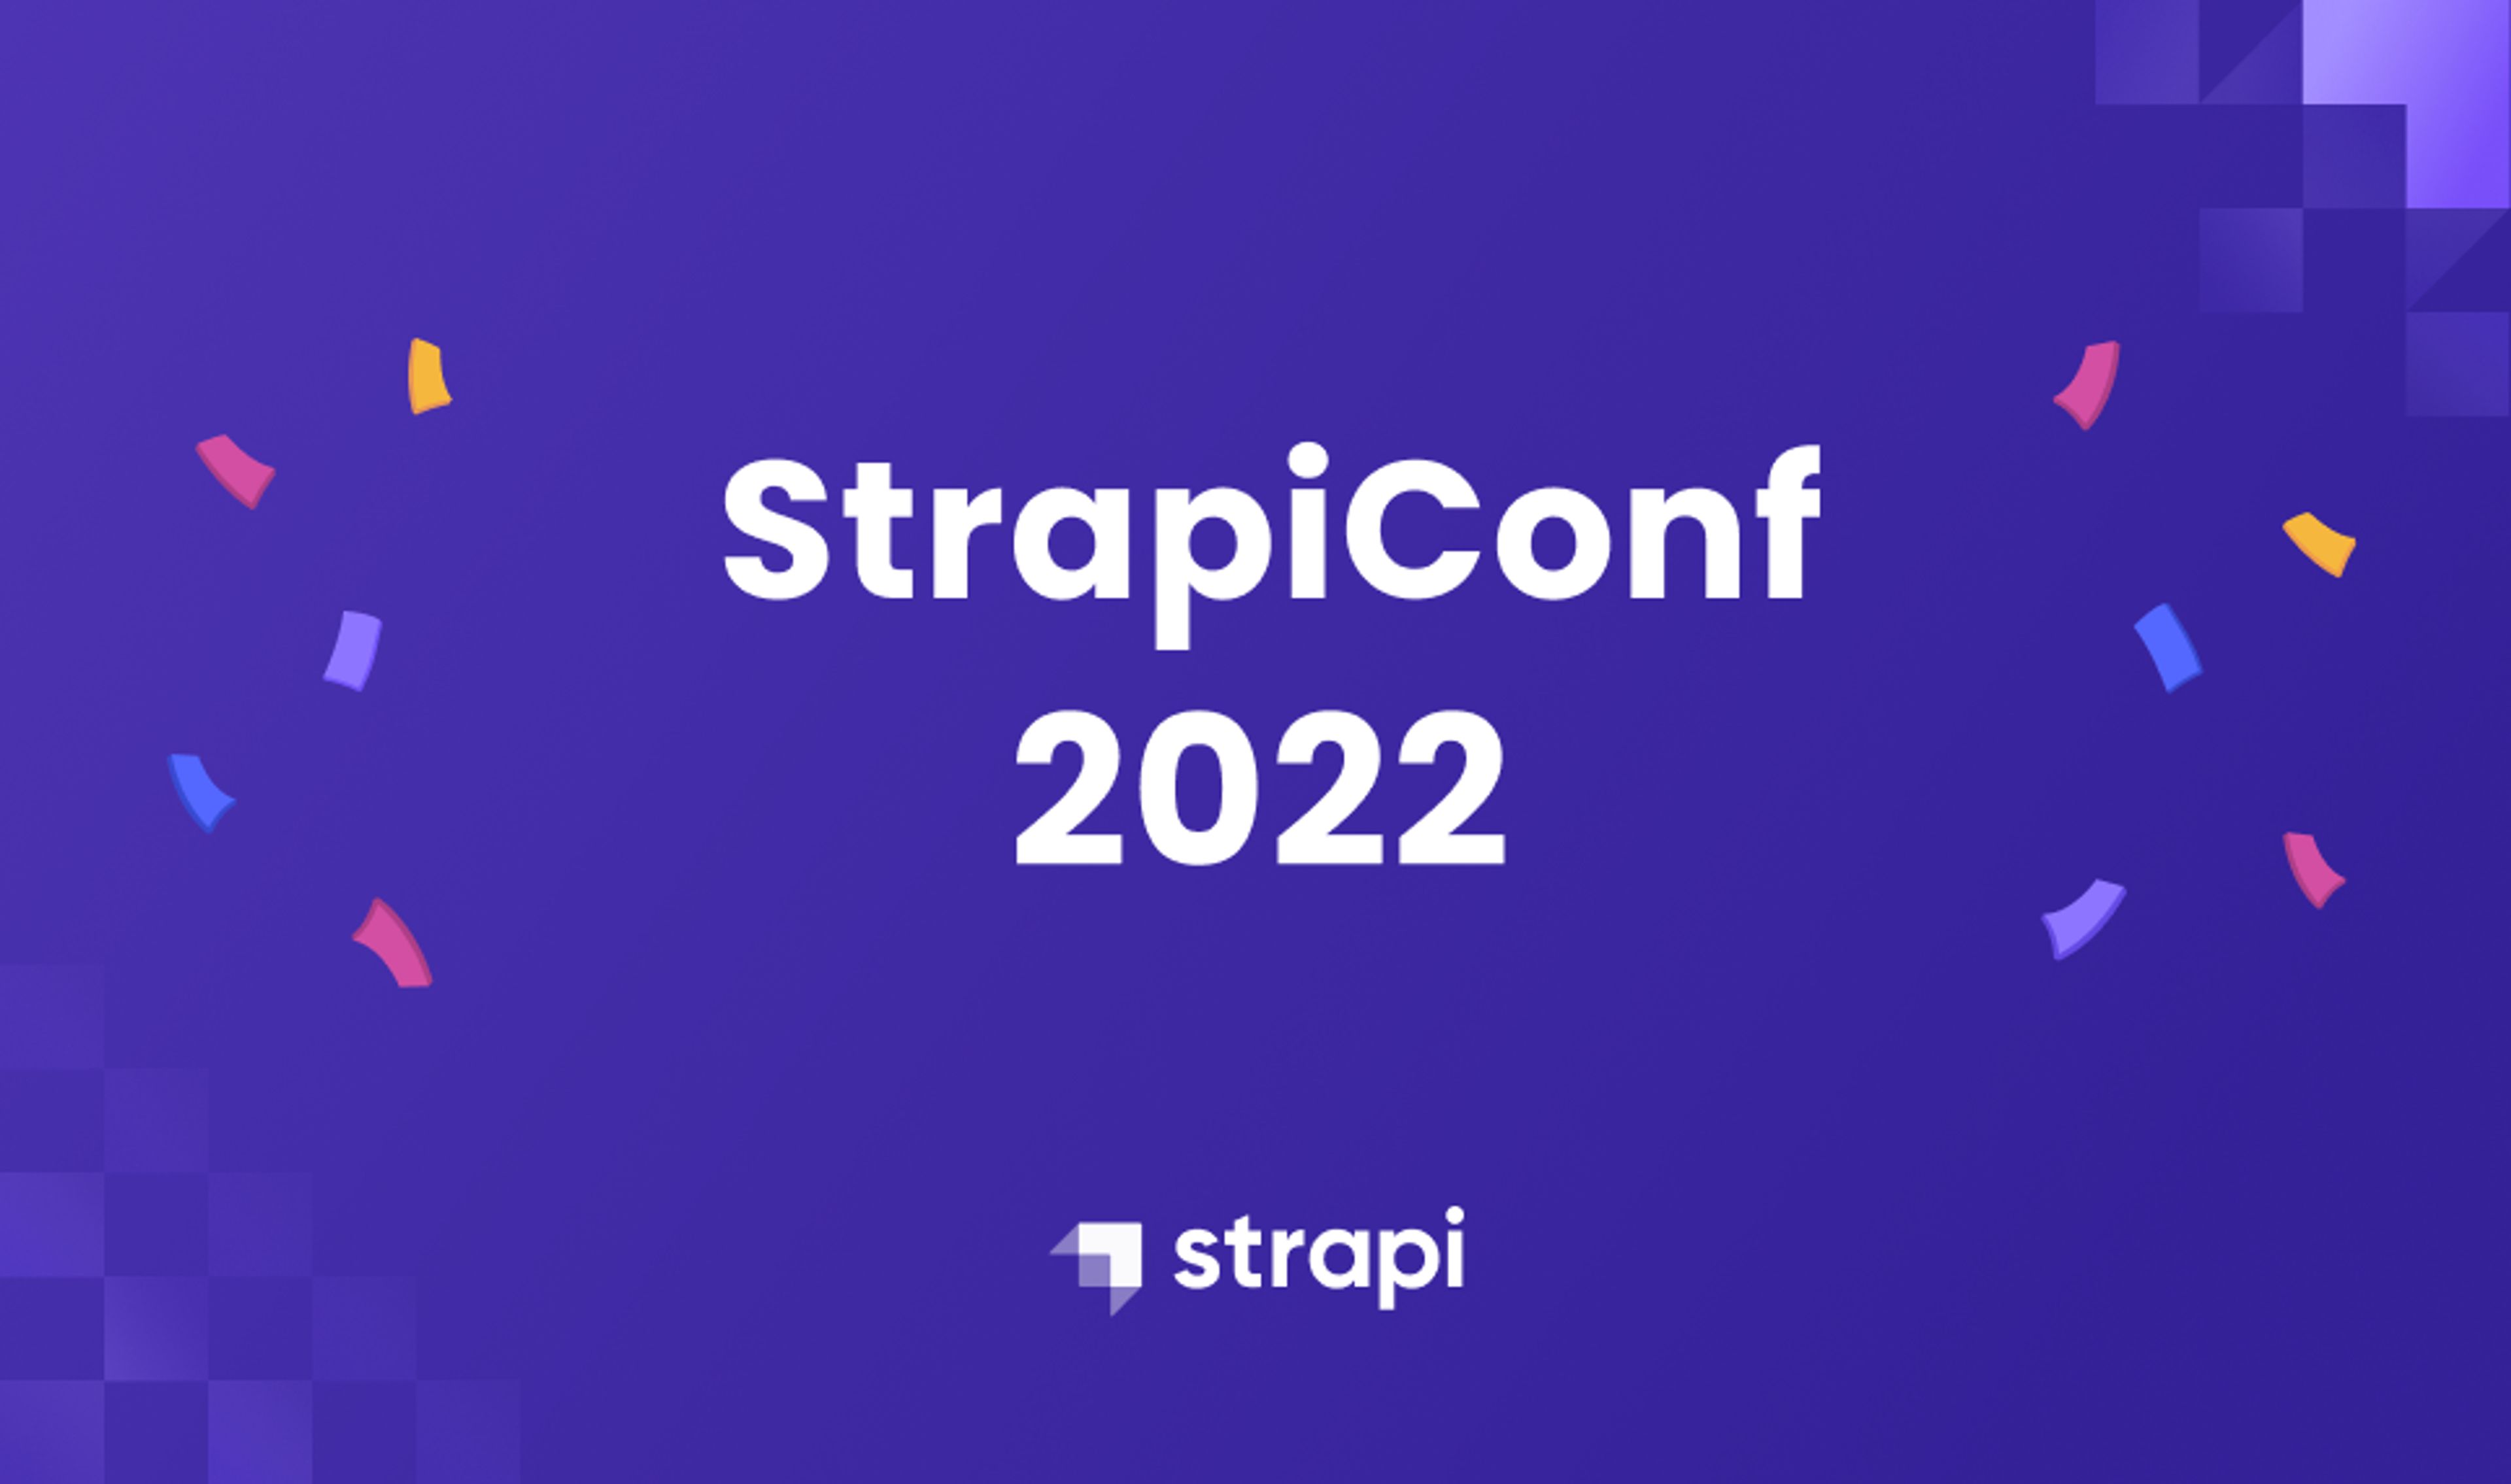 StrapiConf 2022 conference logo against a purple background